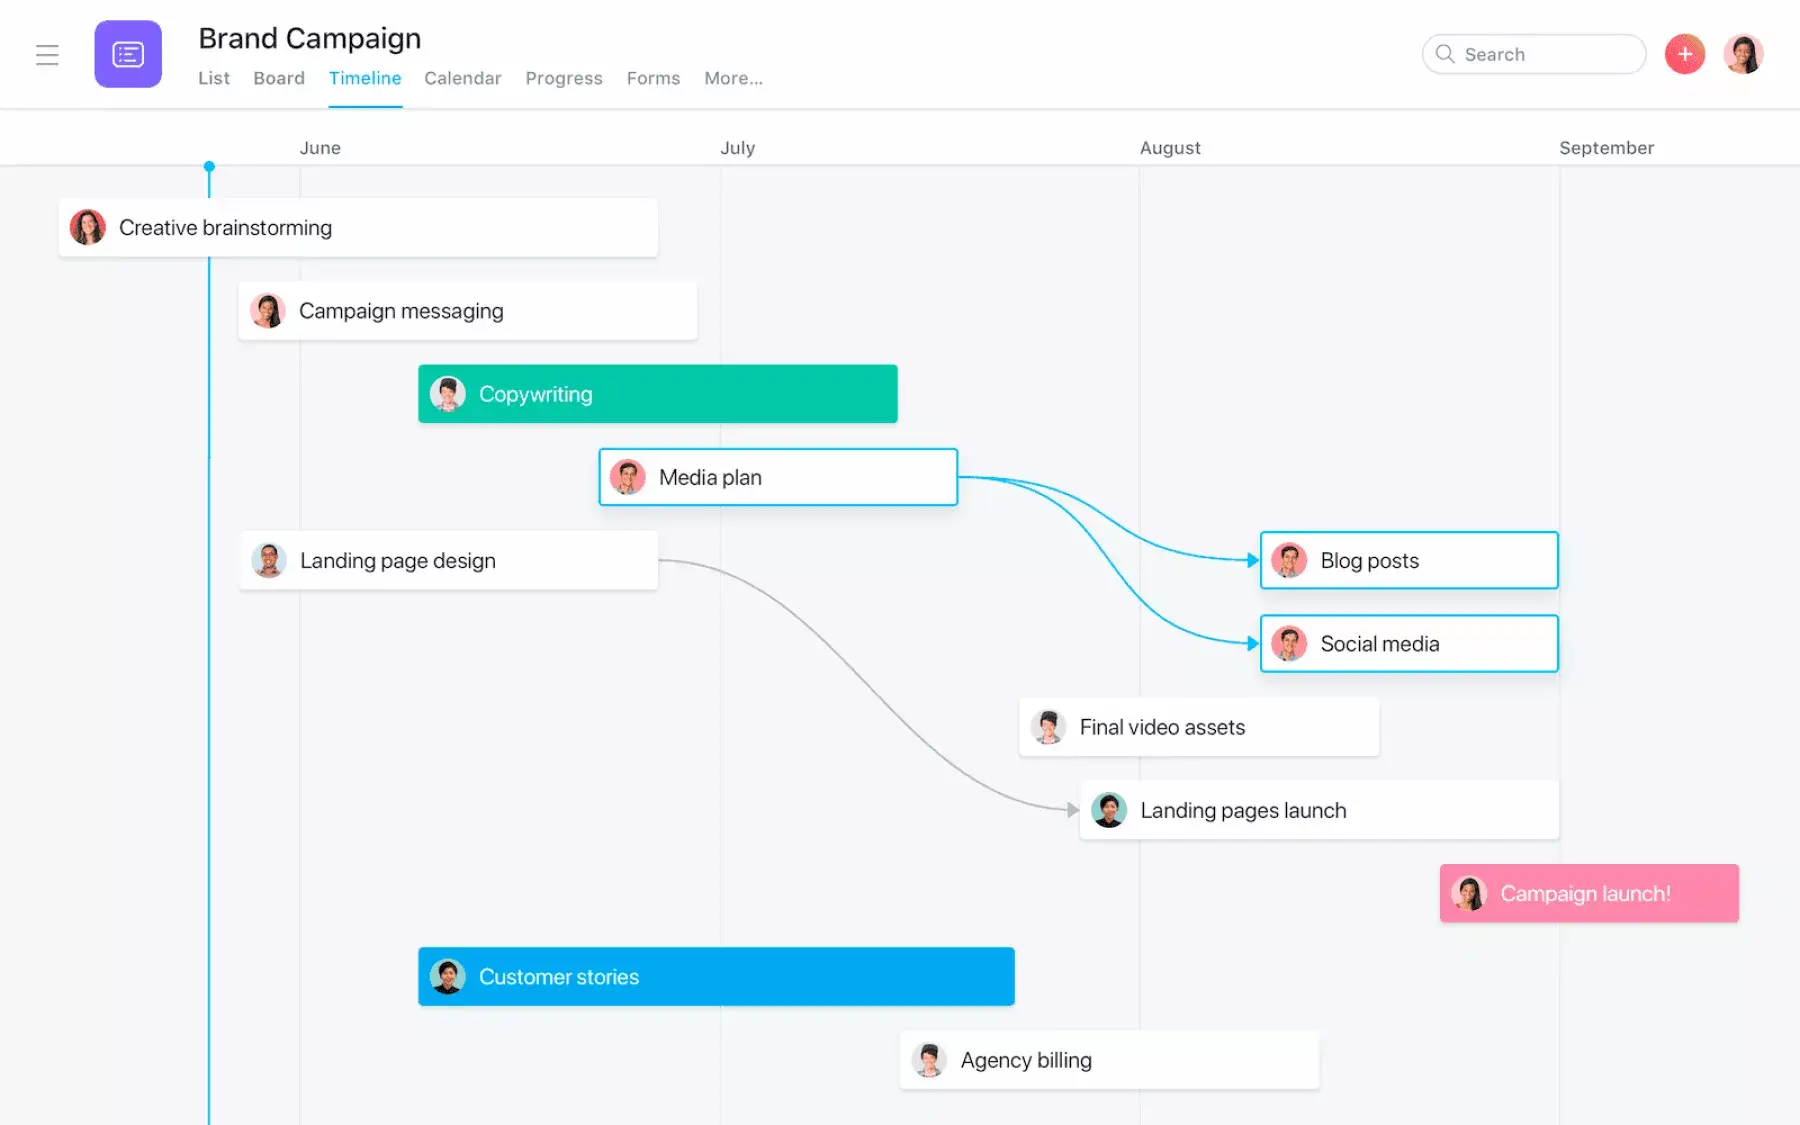 [Product UI] Brand campaign project in Asana, Gantt chart-style view (Timeline)